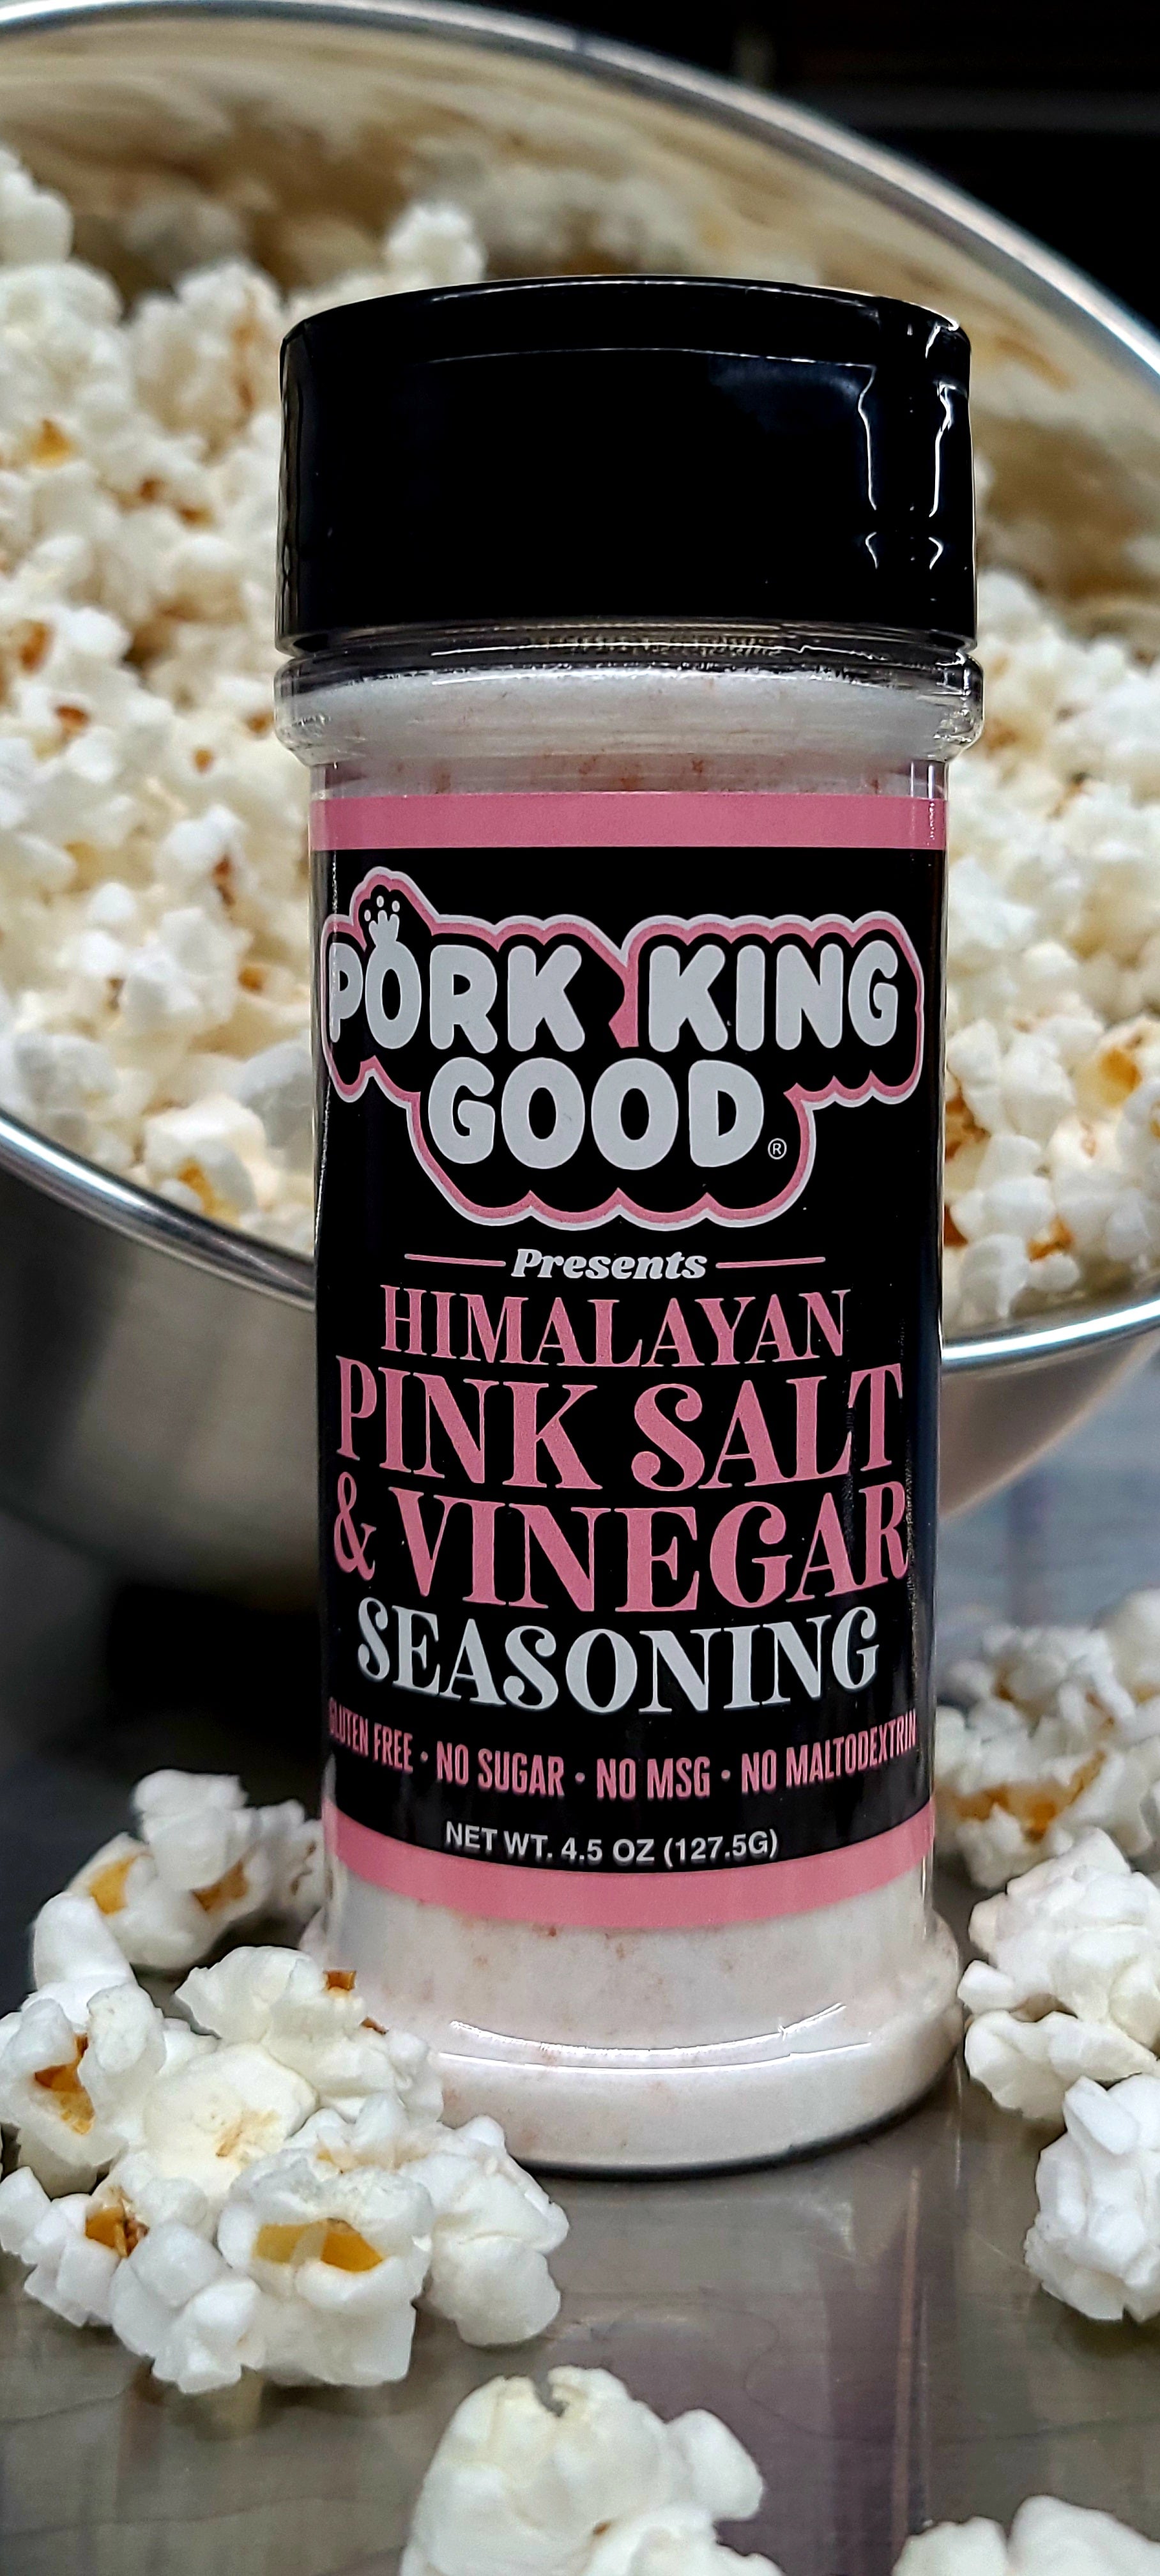 Pork King Good, Manufactured Product, Meat, Snack Food